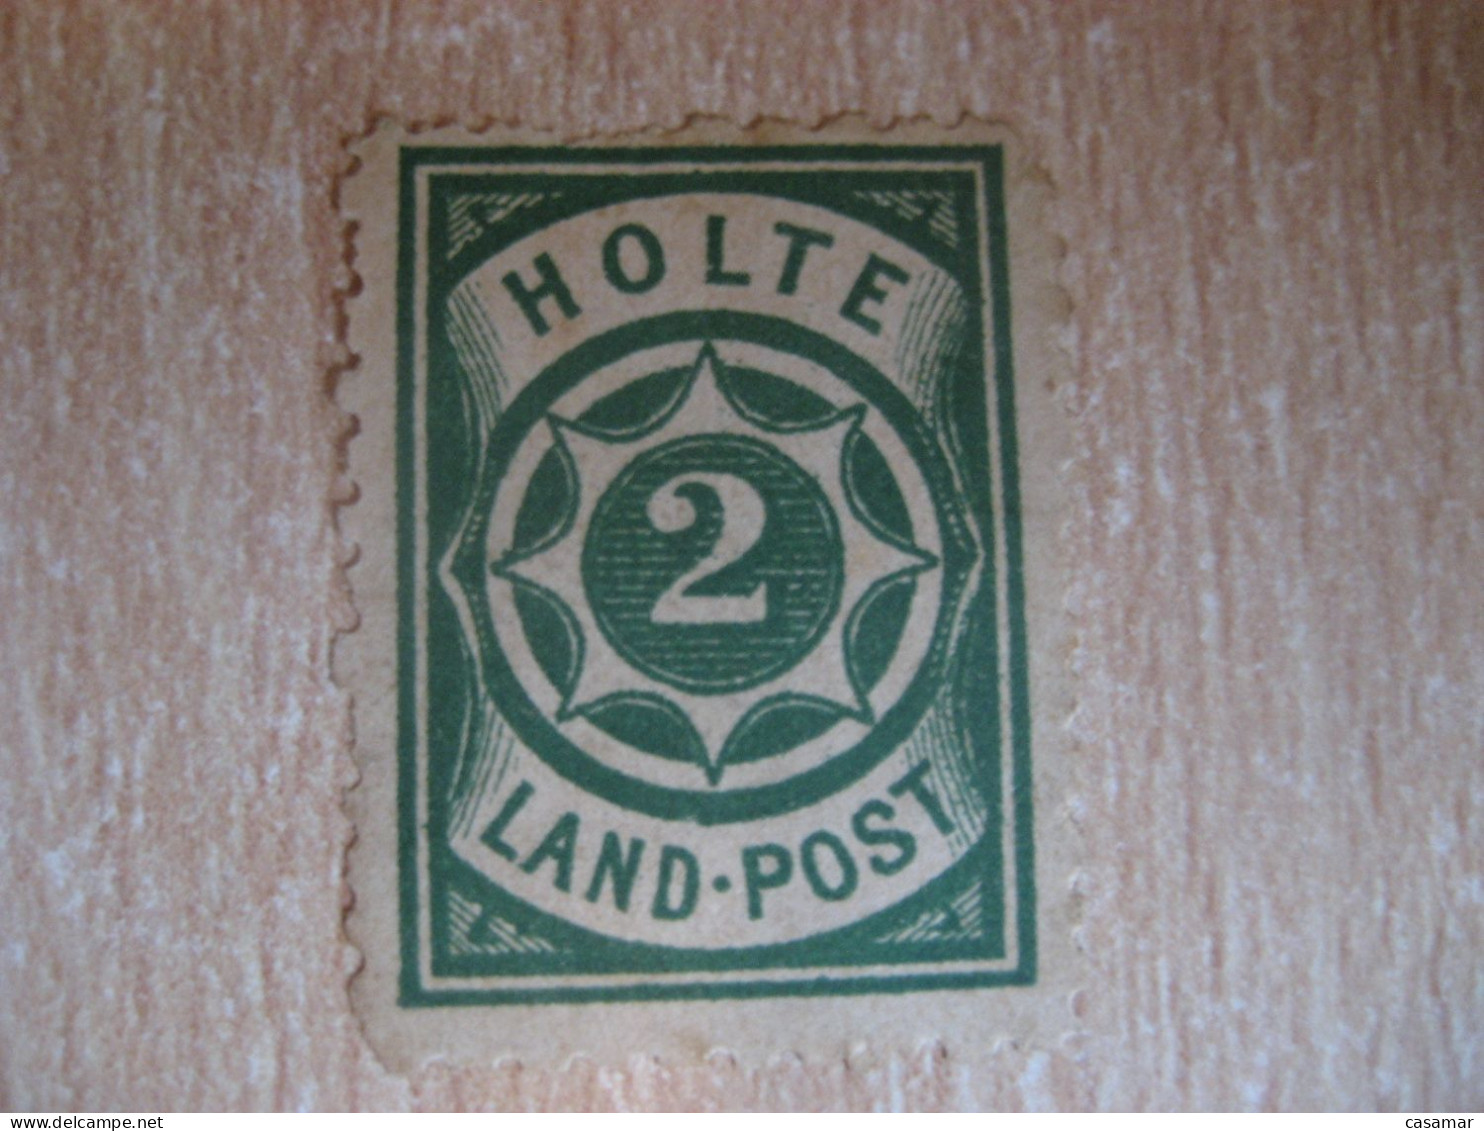 HOLTE 2 Land-Post Privat Private Local Stamp DENMARK Slight Faults - Local Post Stamps